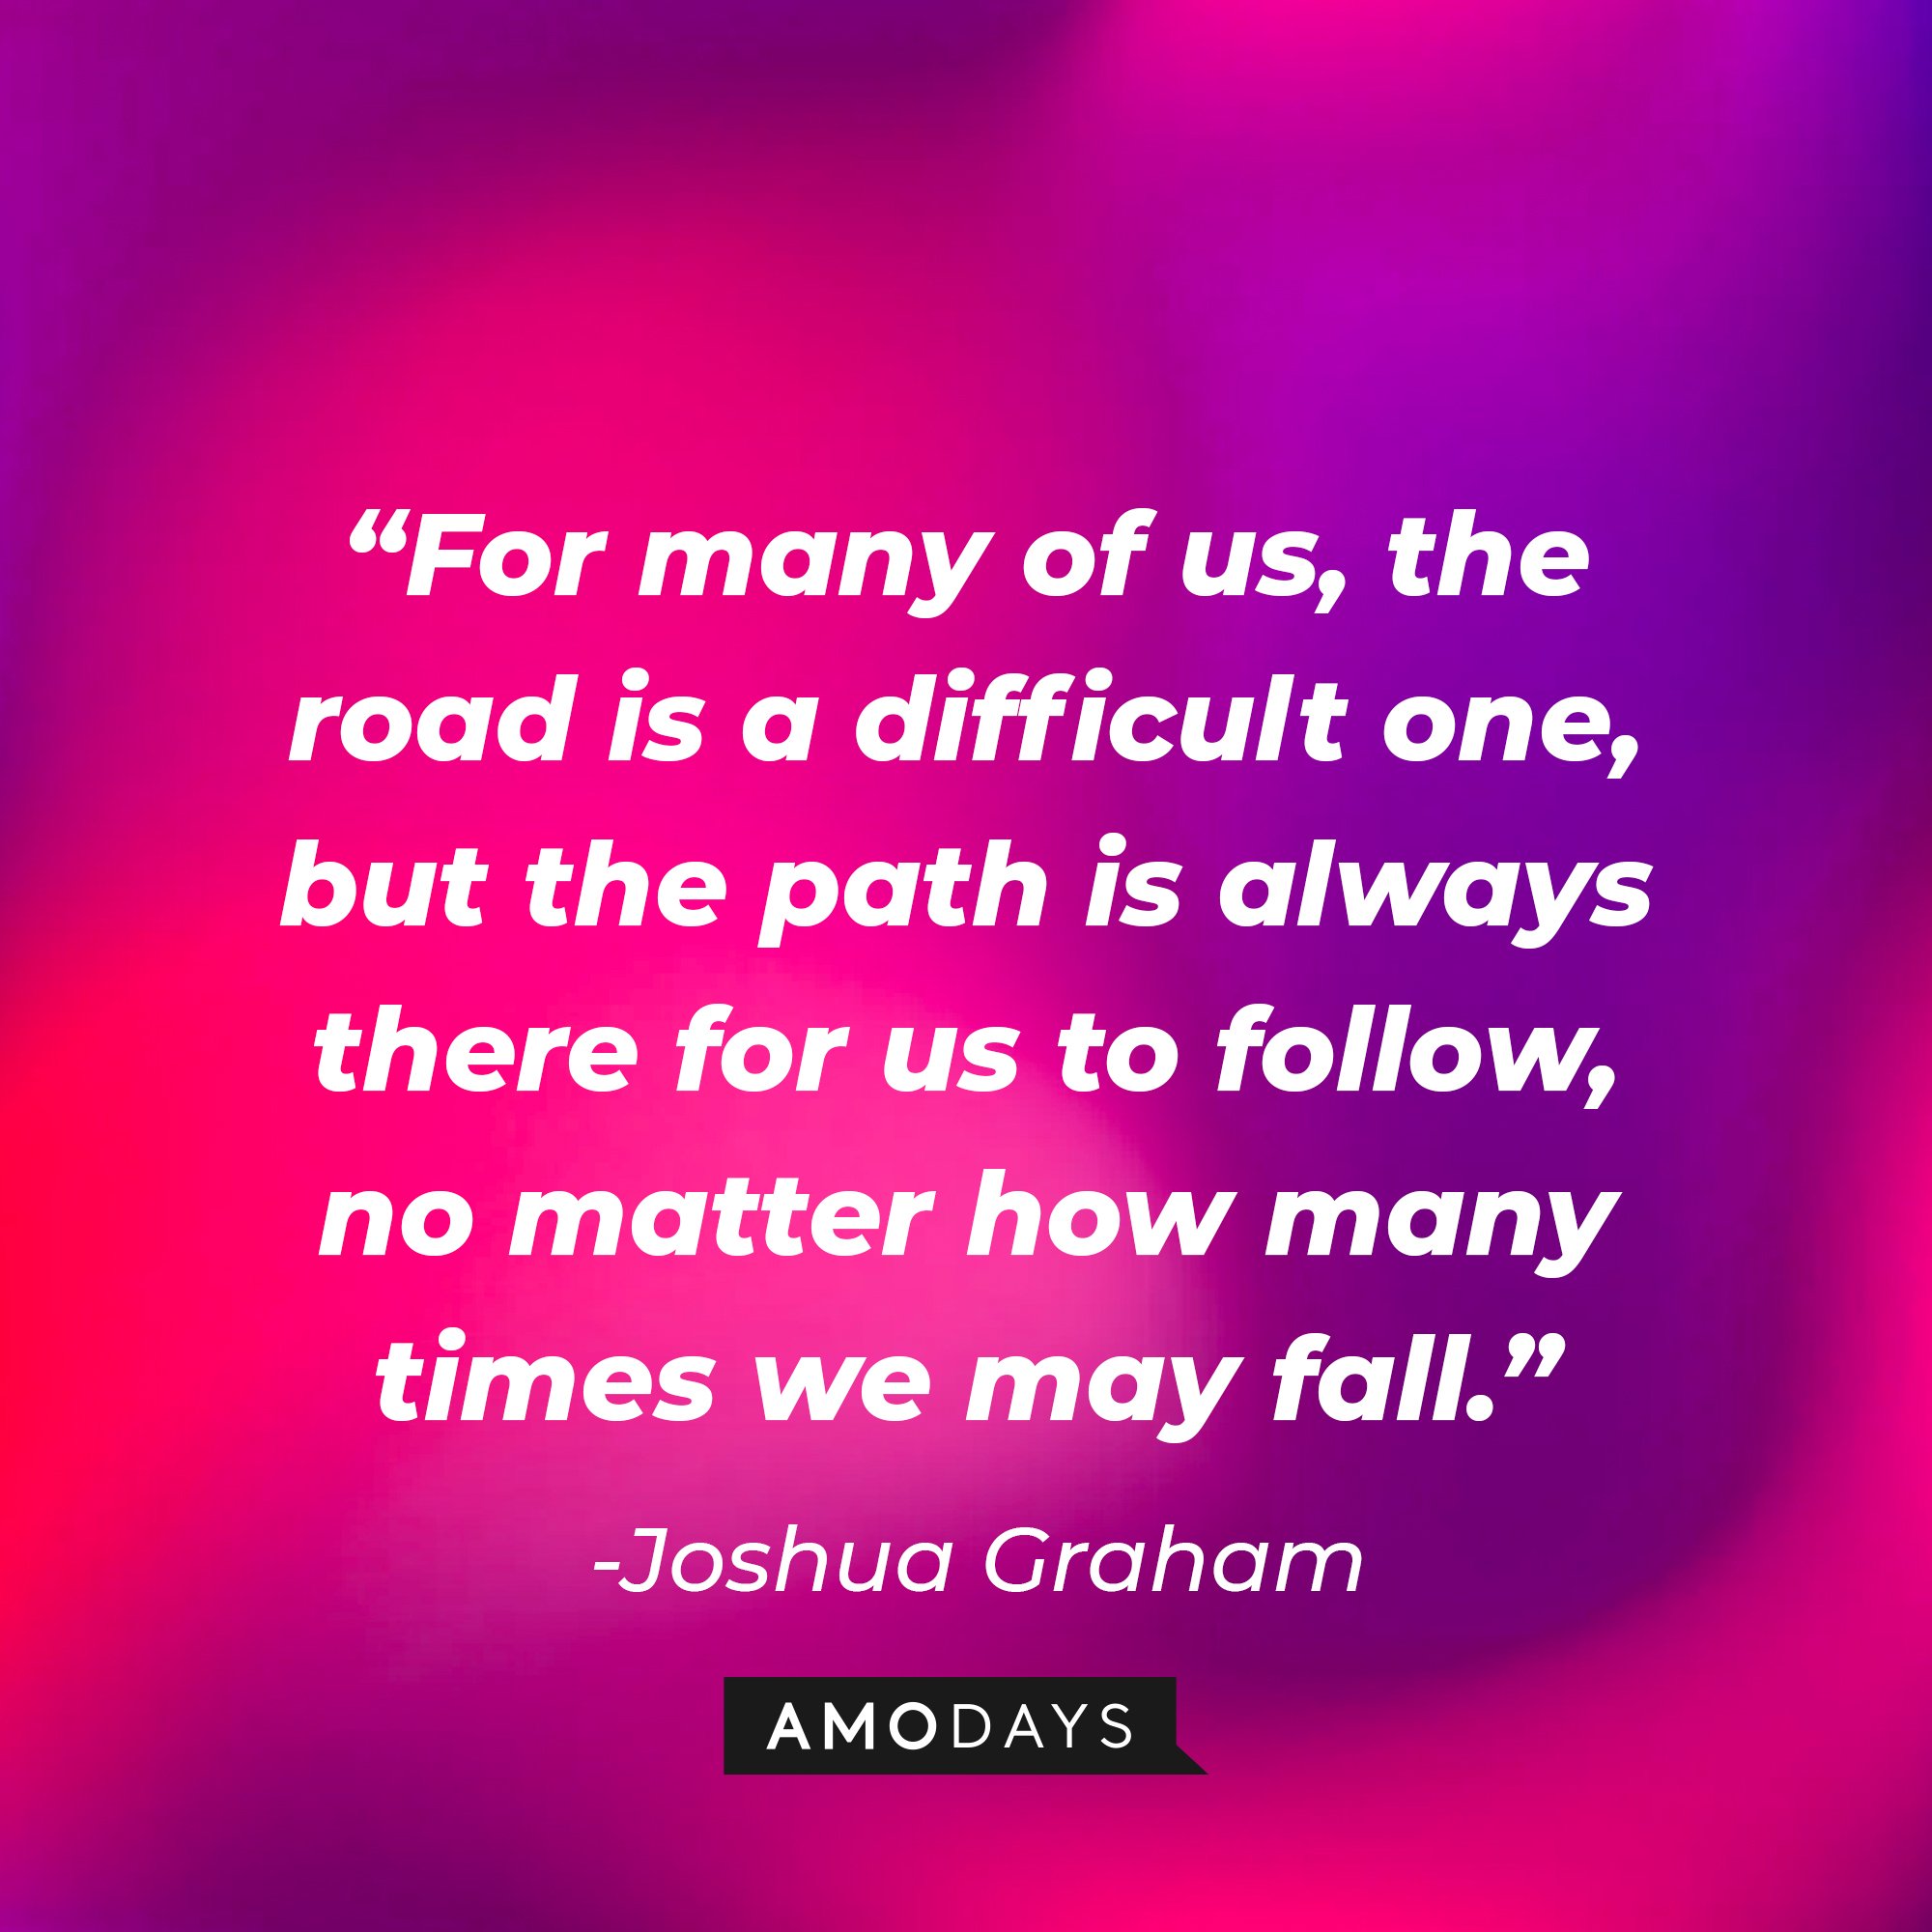 Joshua Graham's quote: “For many of us, the road is a difficult one, but the path is always there for us to follow, no matter how many times we may fall.”   | Source: Amodays